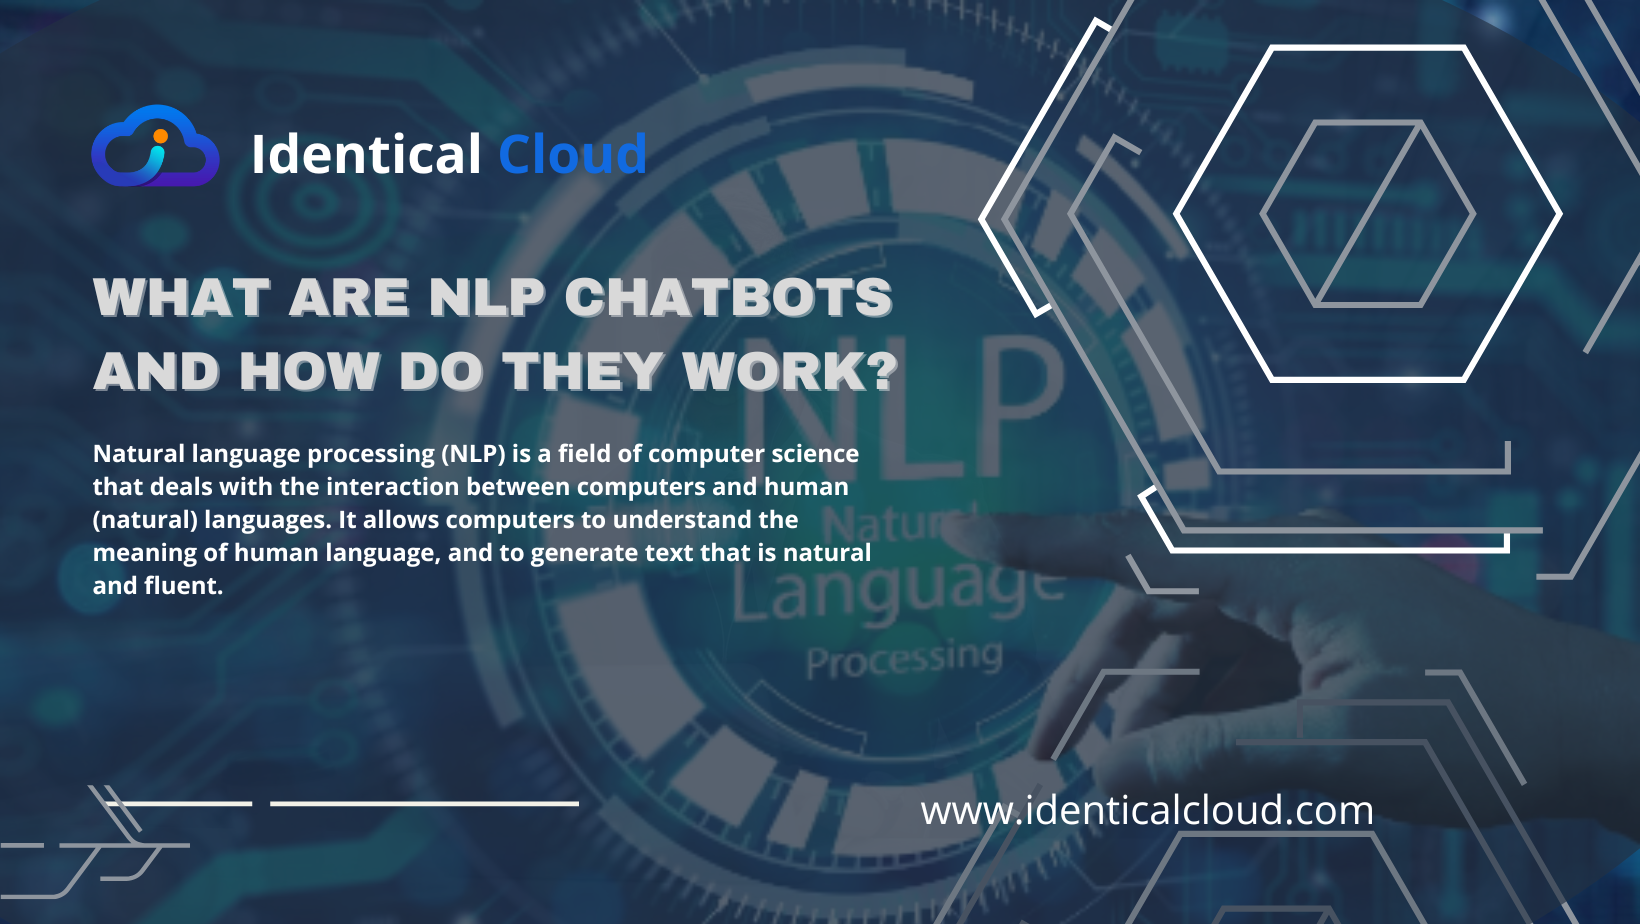 What are NLP Chatbots and How Do They Work? - identicalcloud.com